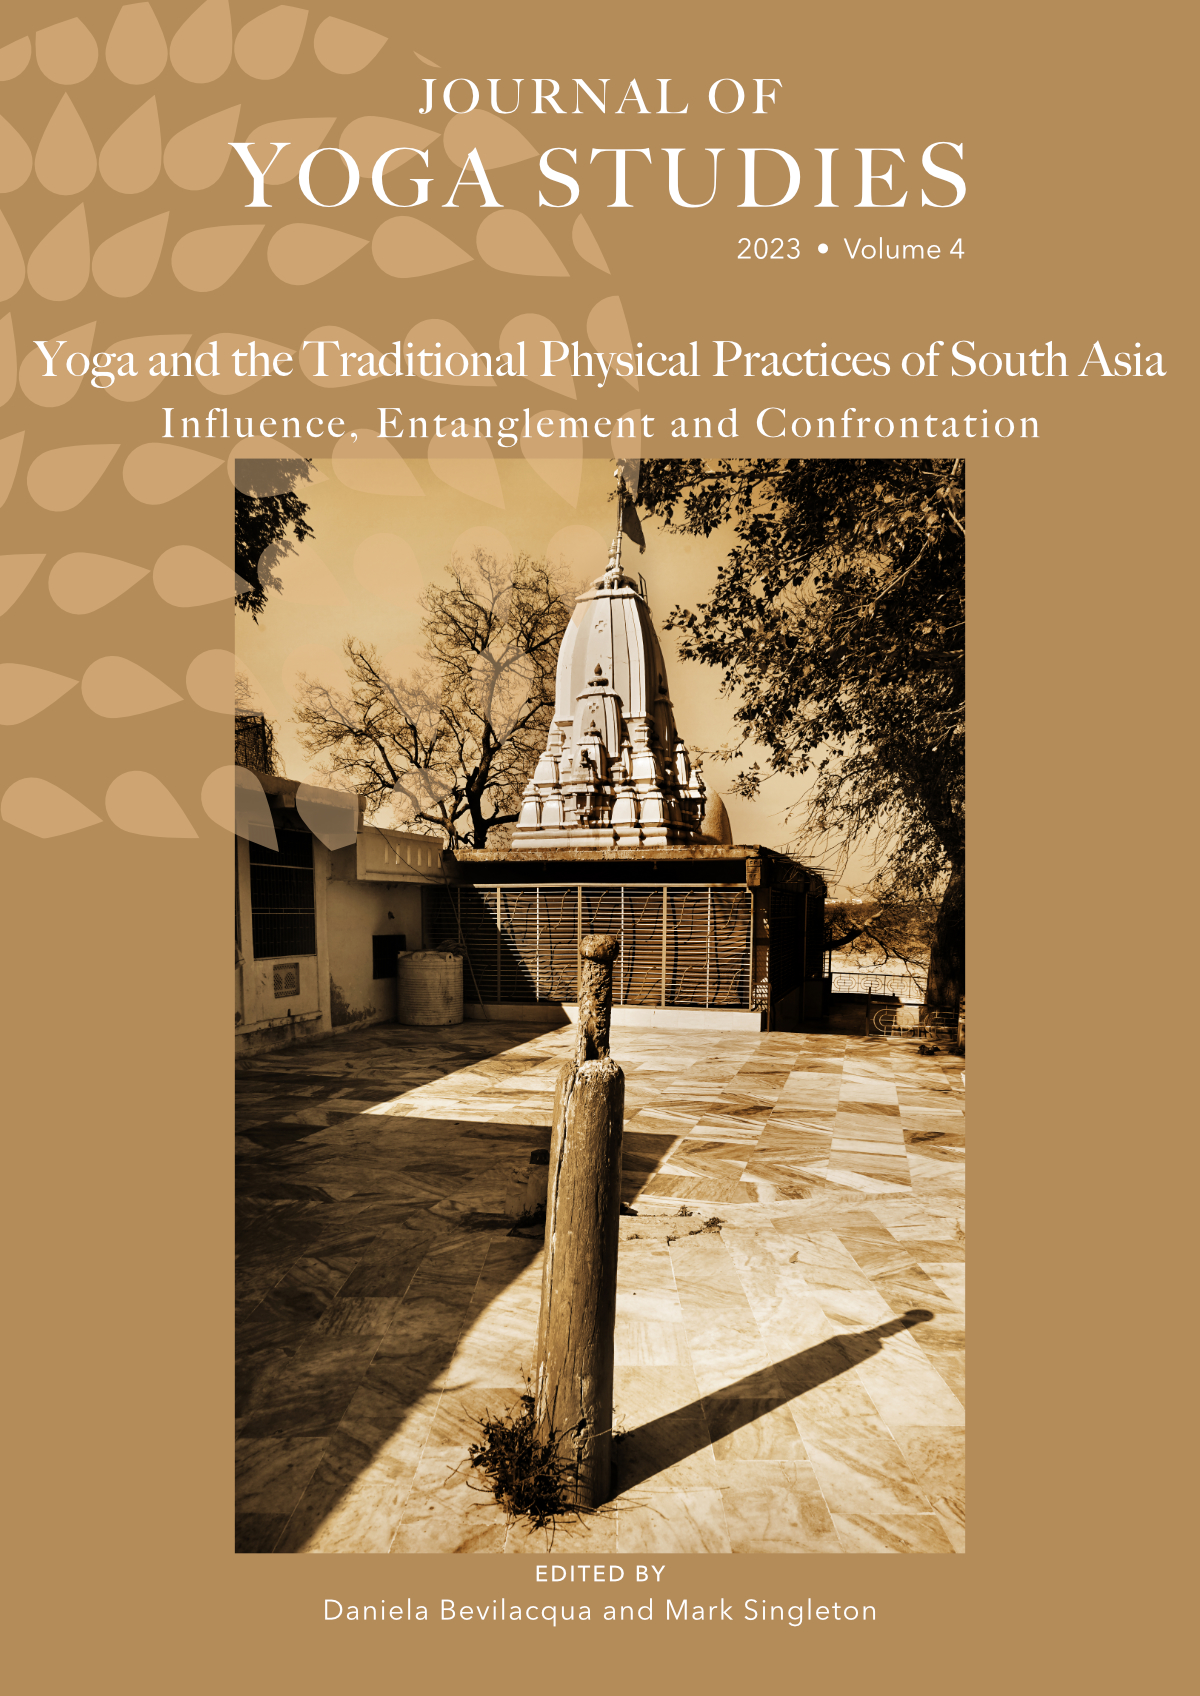 Journal of Yoga Studies | 2023 • Volume 4: Yoga and the Traditional Physical Practices of South Asia. Edited by Daniela Bevilacqua and Mark Singleton.